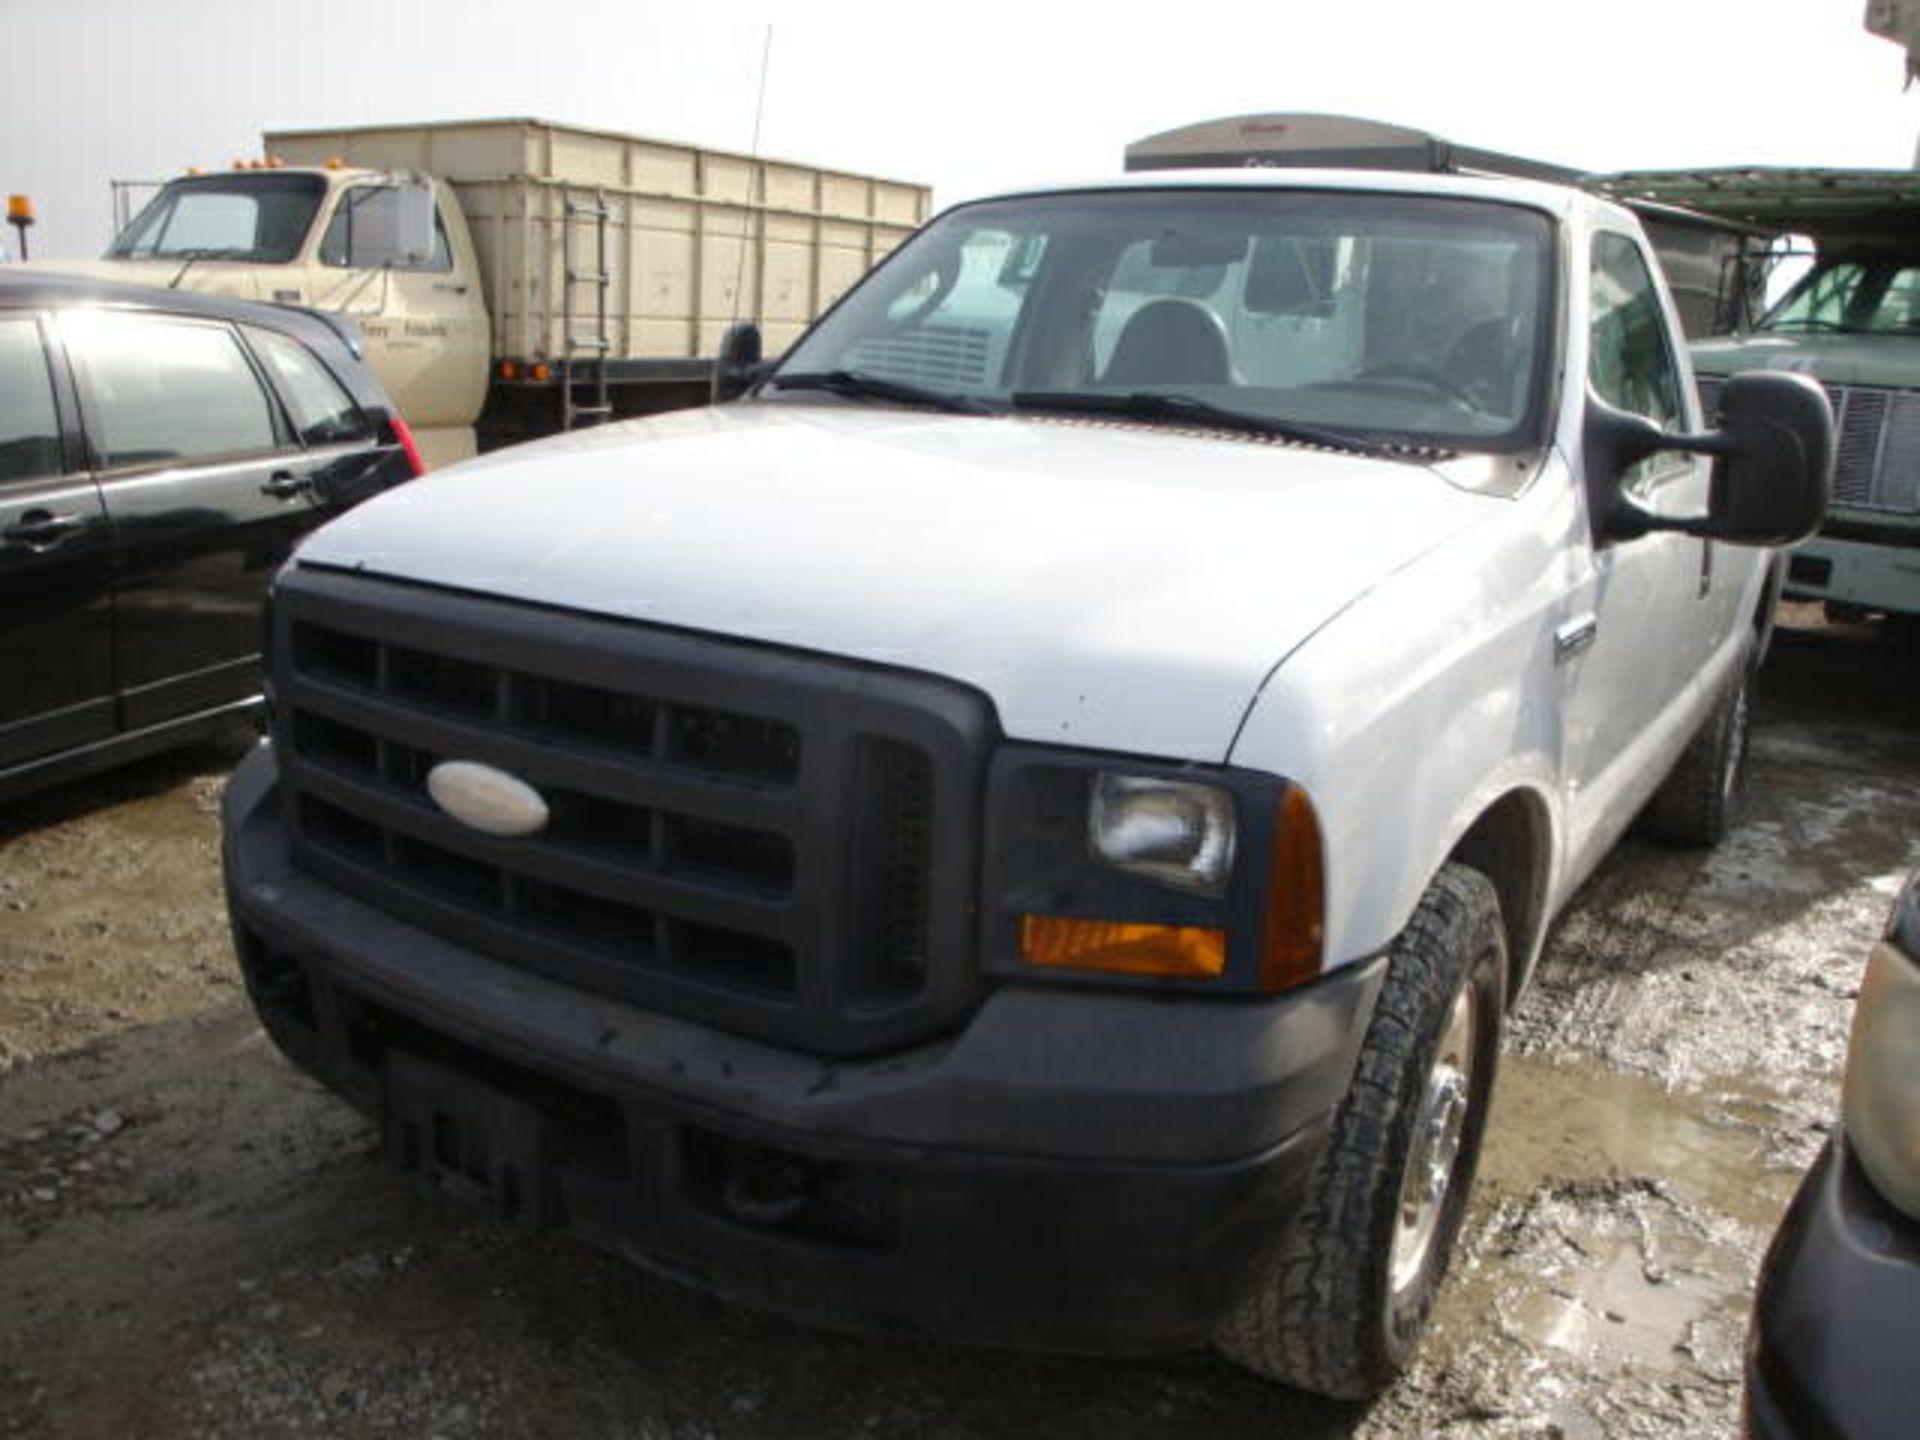 (Lot 154a) 2005 Ford F250 2wd, 5.4Lt gas, 254,000 miles, automatic